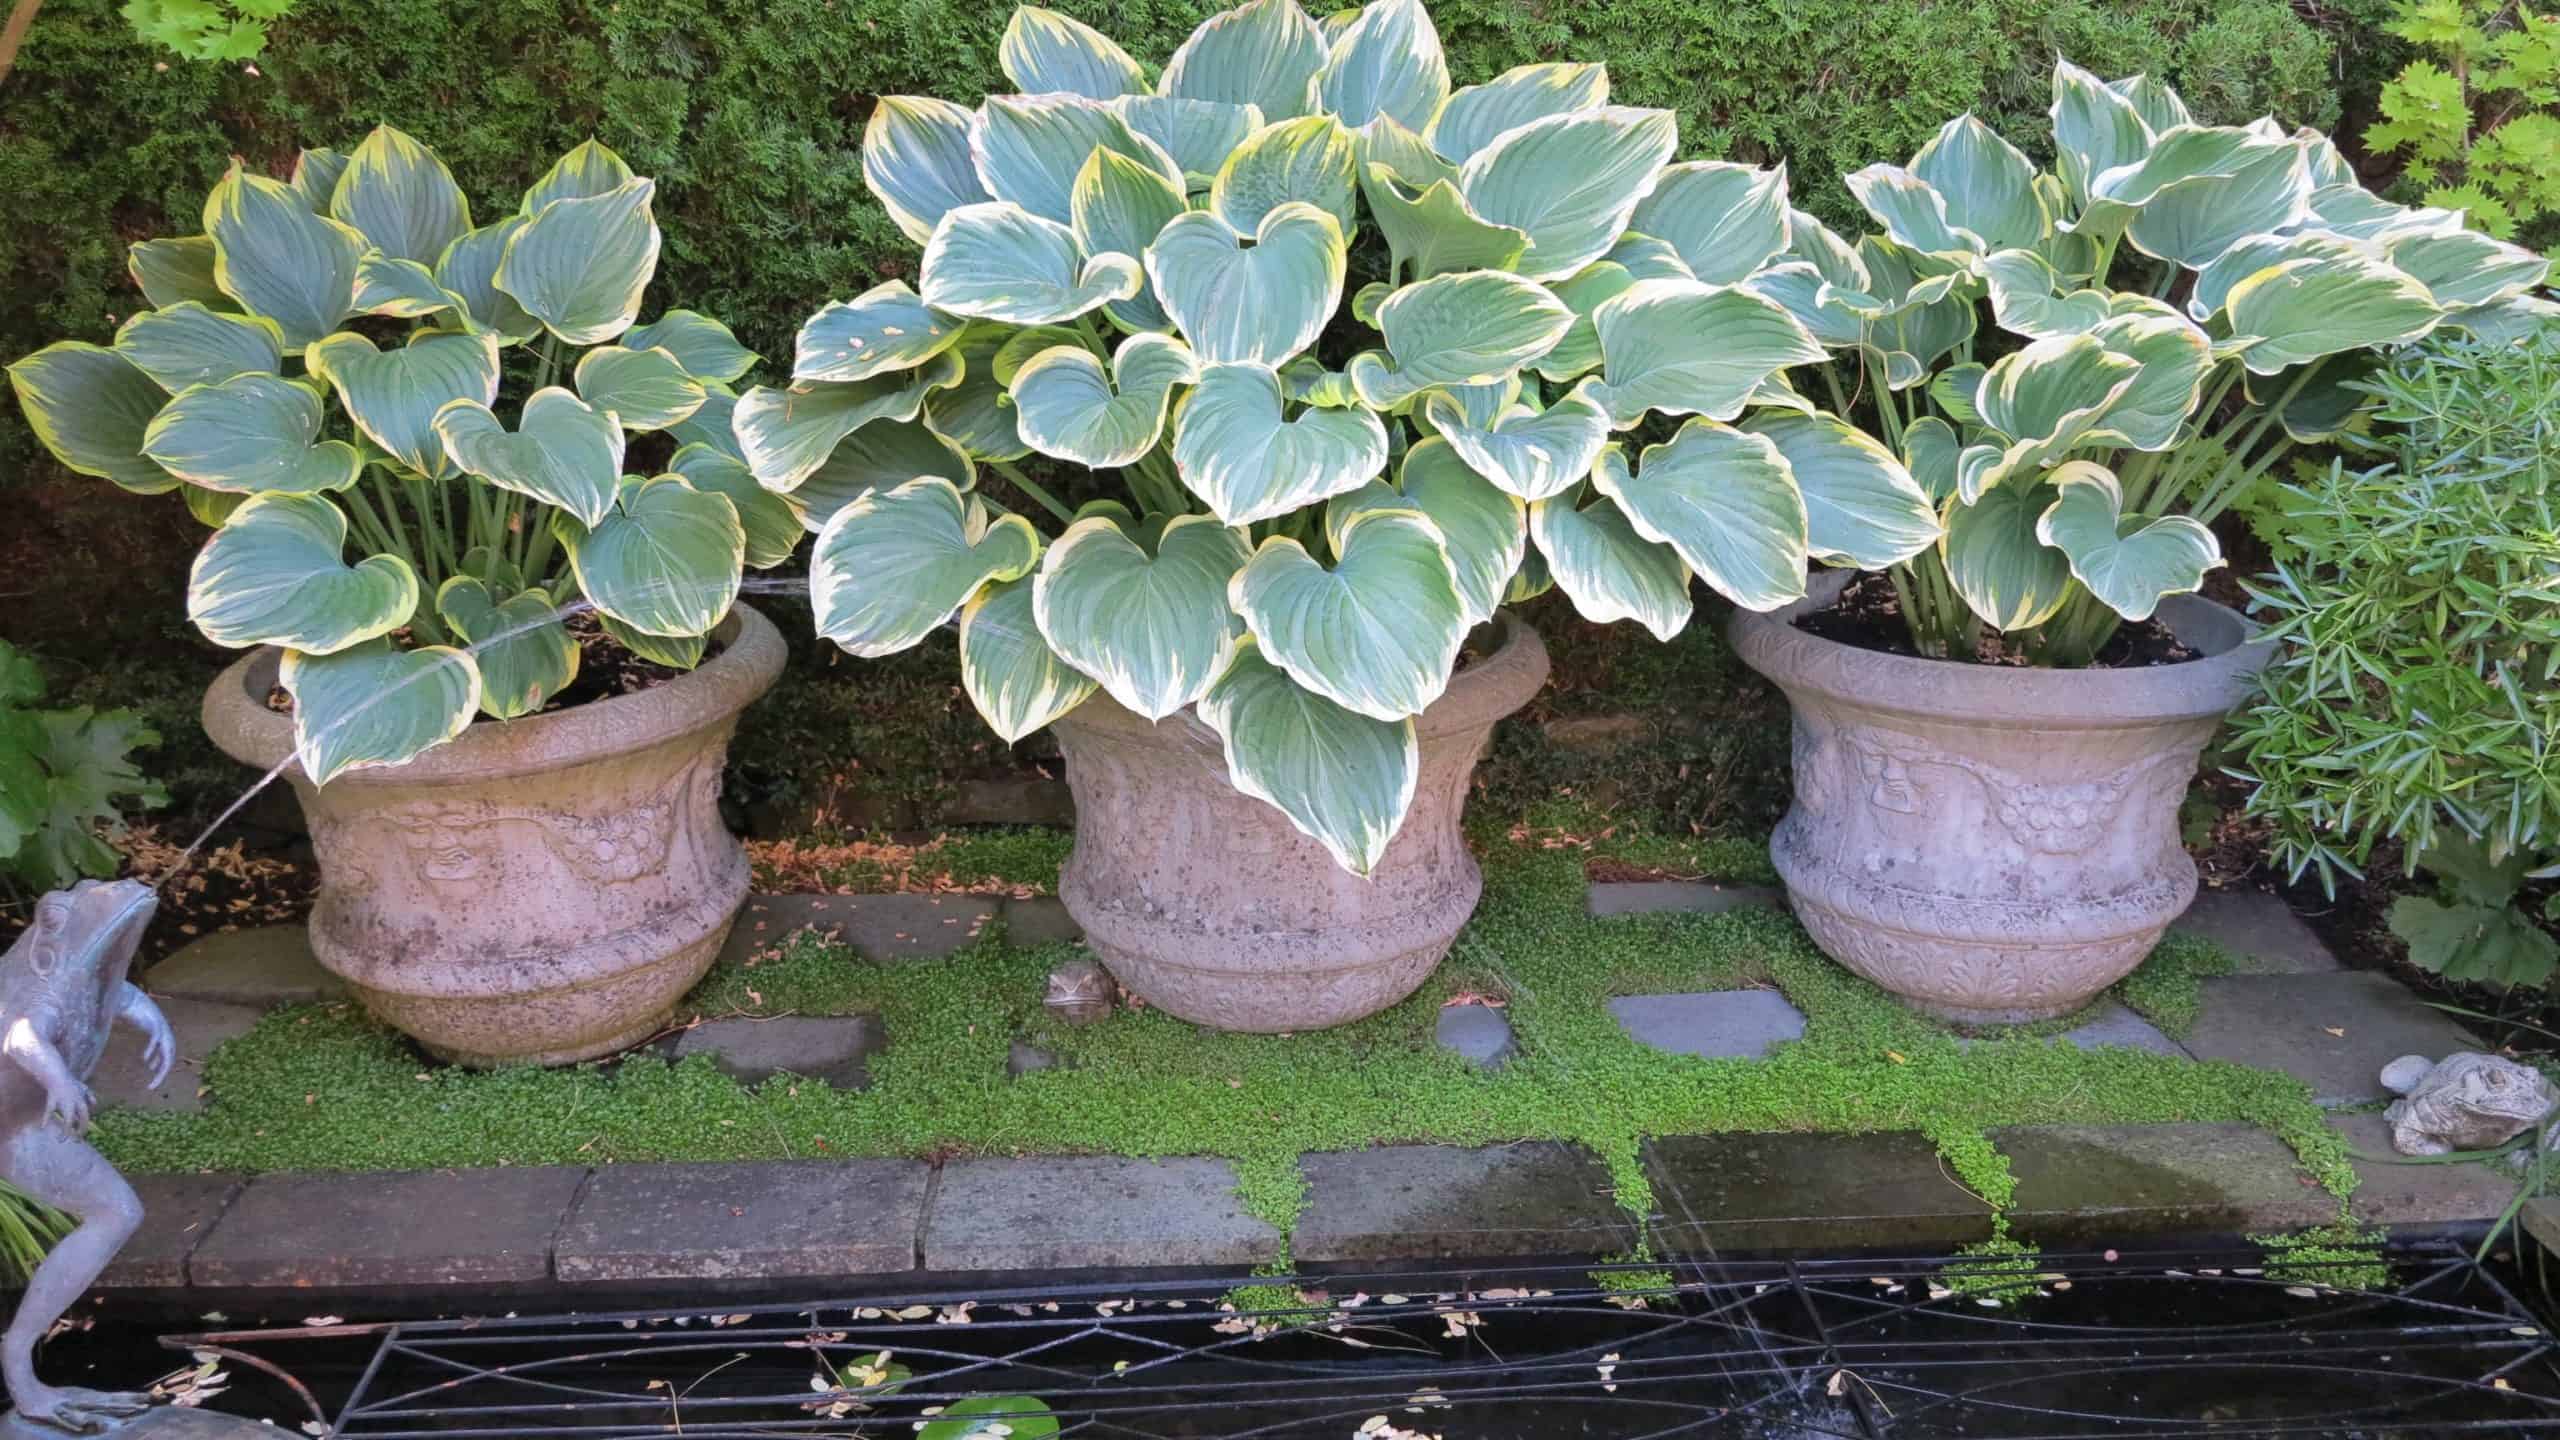 Hostas are easy to overwinter in containers.